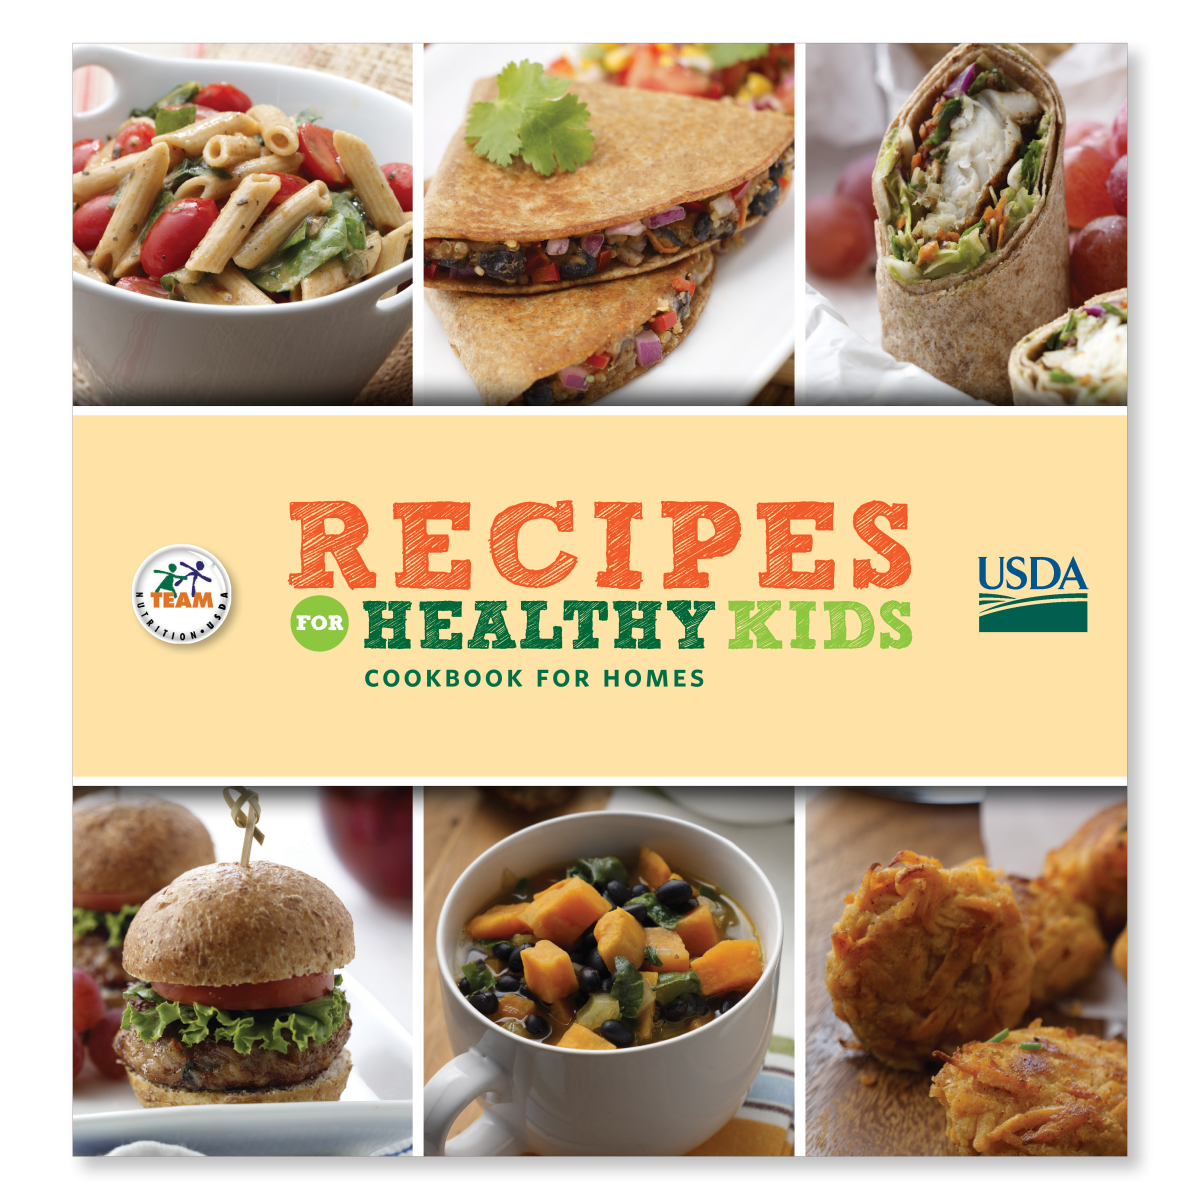 Recipes for Healthy Kids